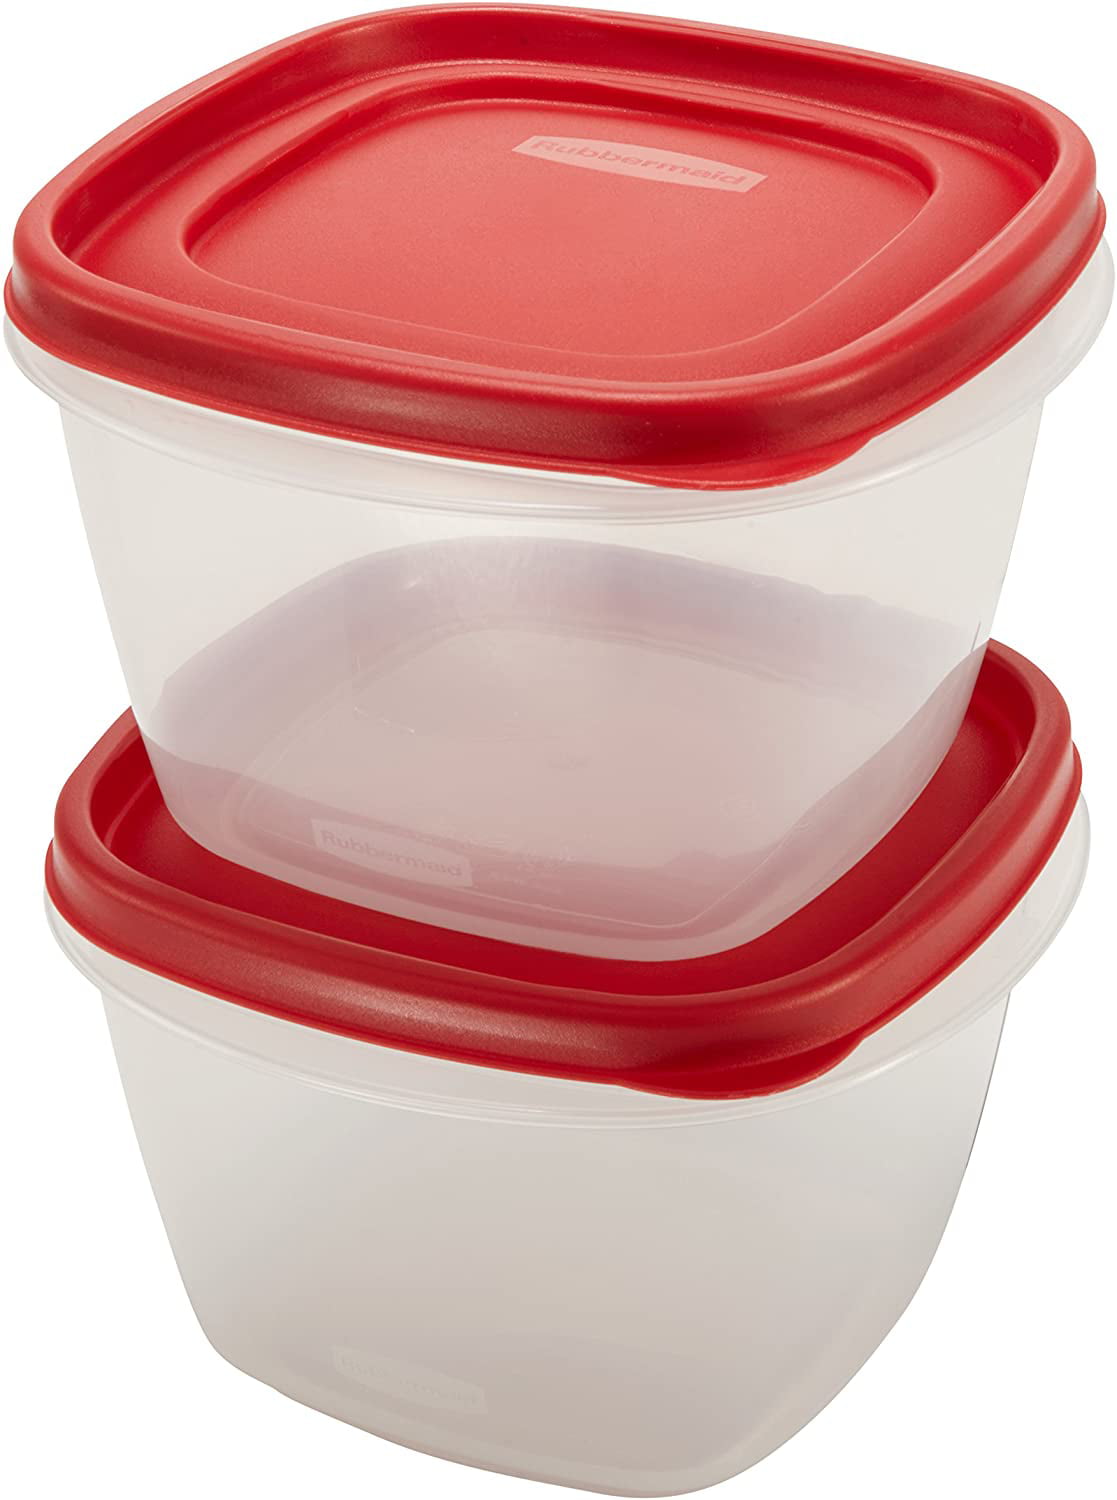 Rubbermaid® Easy-Find Lids Storage Containers 2 Pack - Red/Clear, 2 pk -  Fry's Food Stores